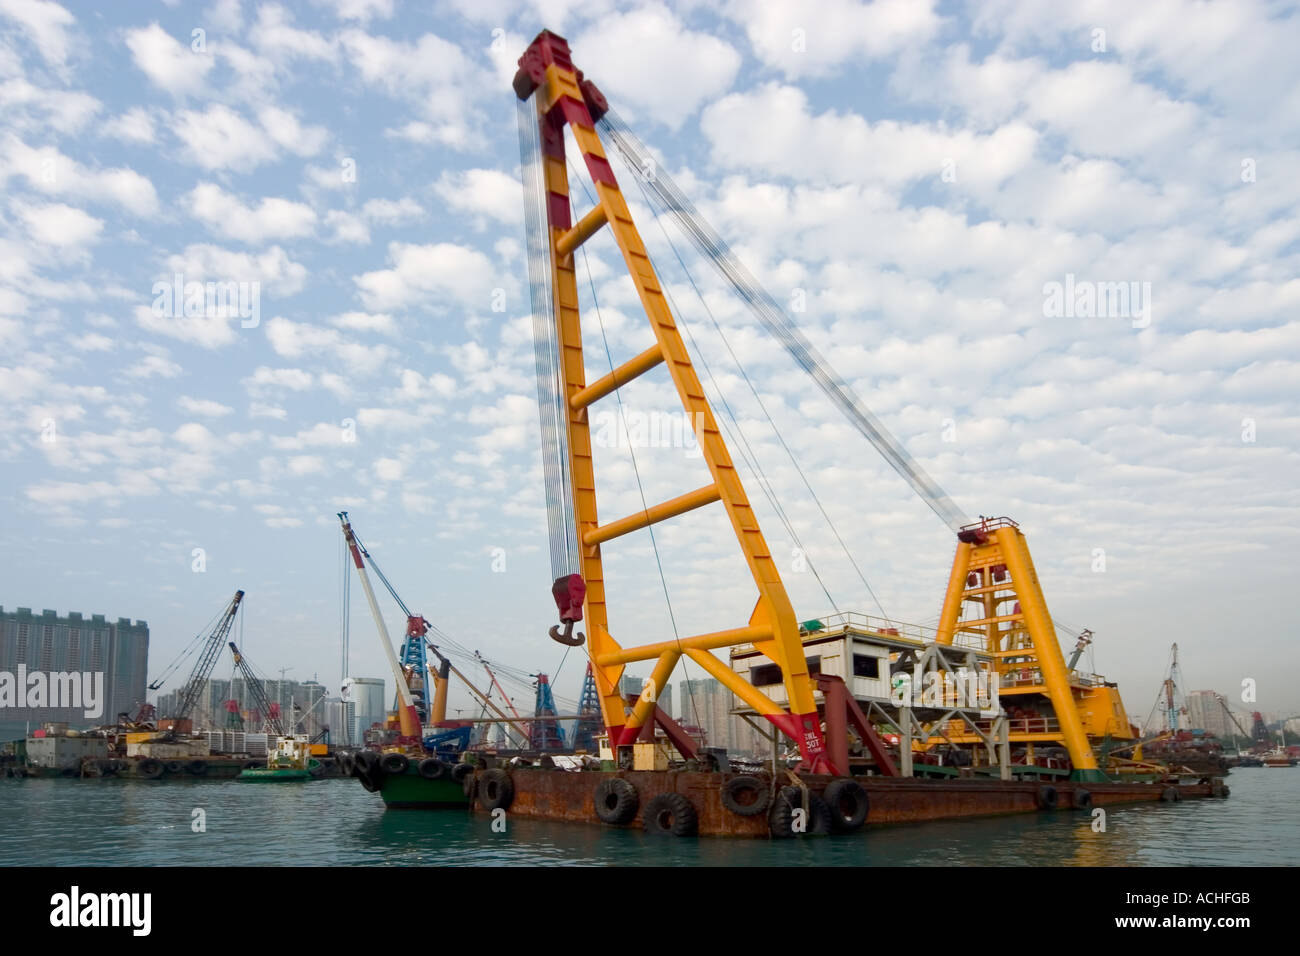 Heavy Lift Crane Barge in Kowloon Typhoon Shelter with Blue Sky and fluffy clouds Hong Kong Stock Photo